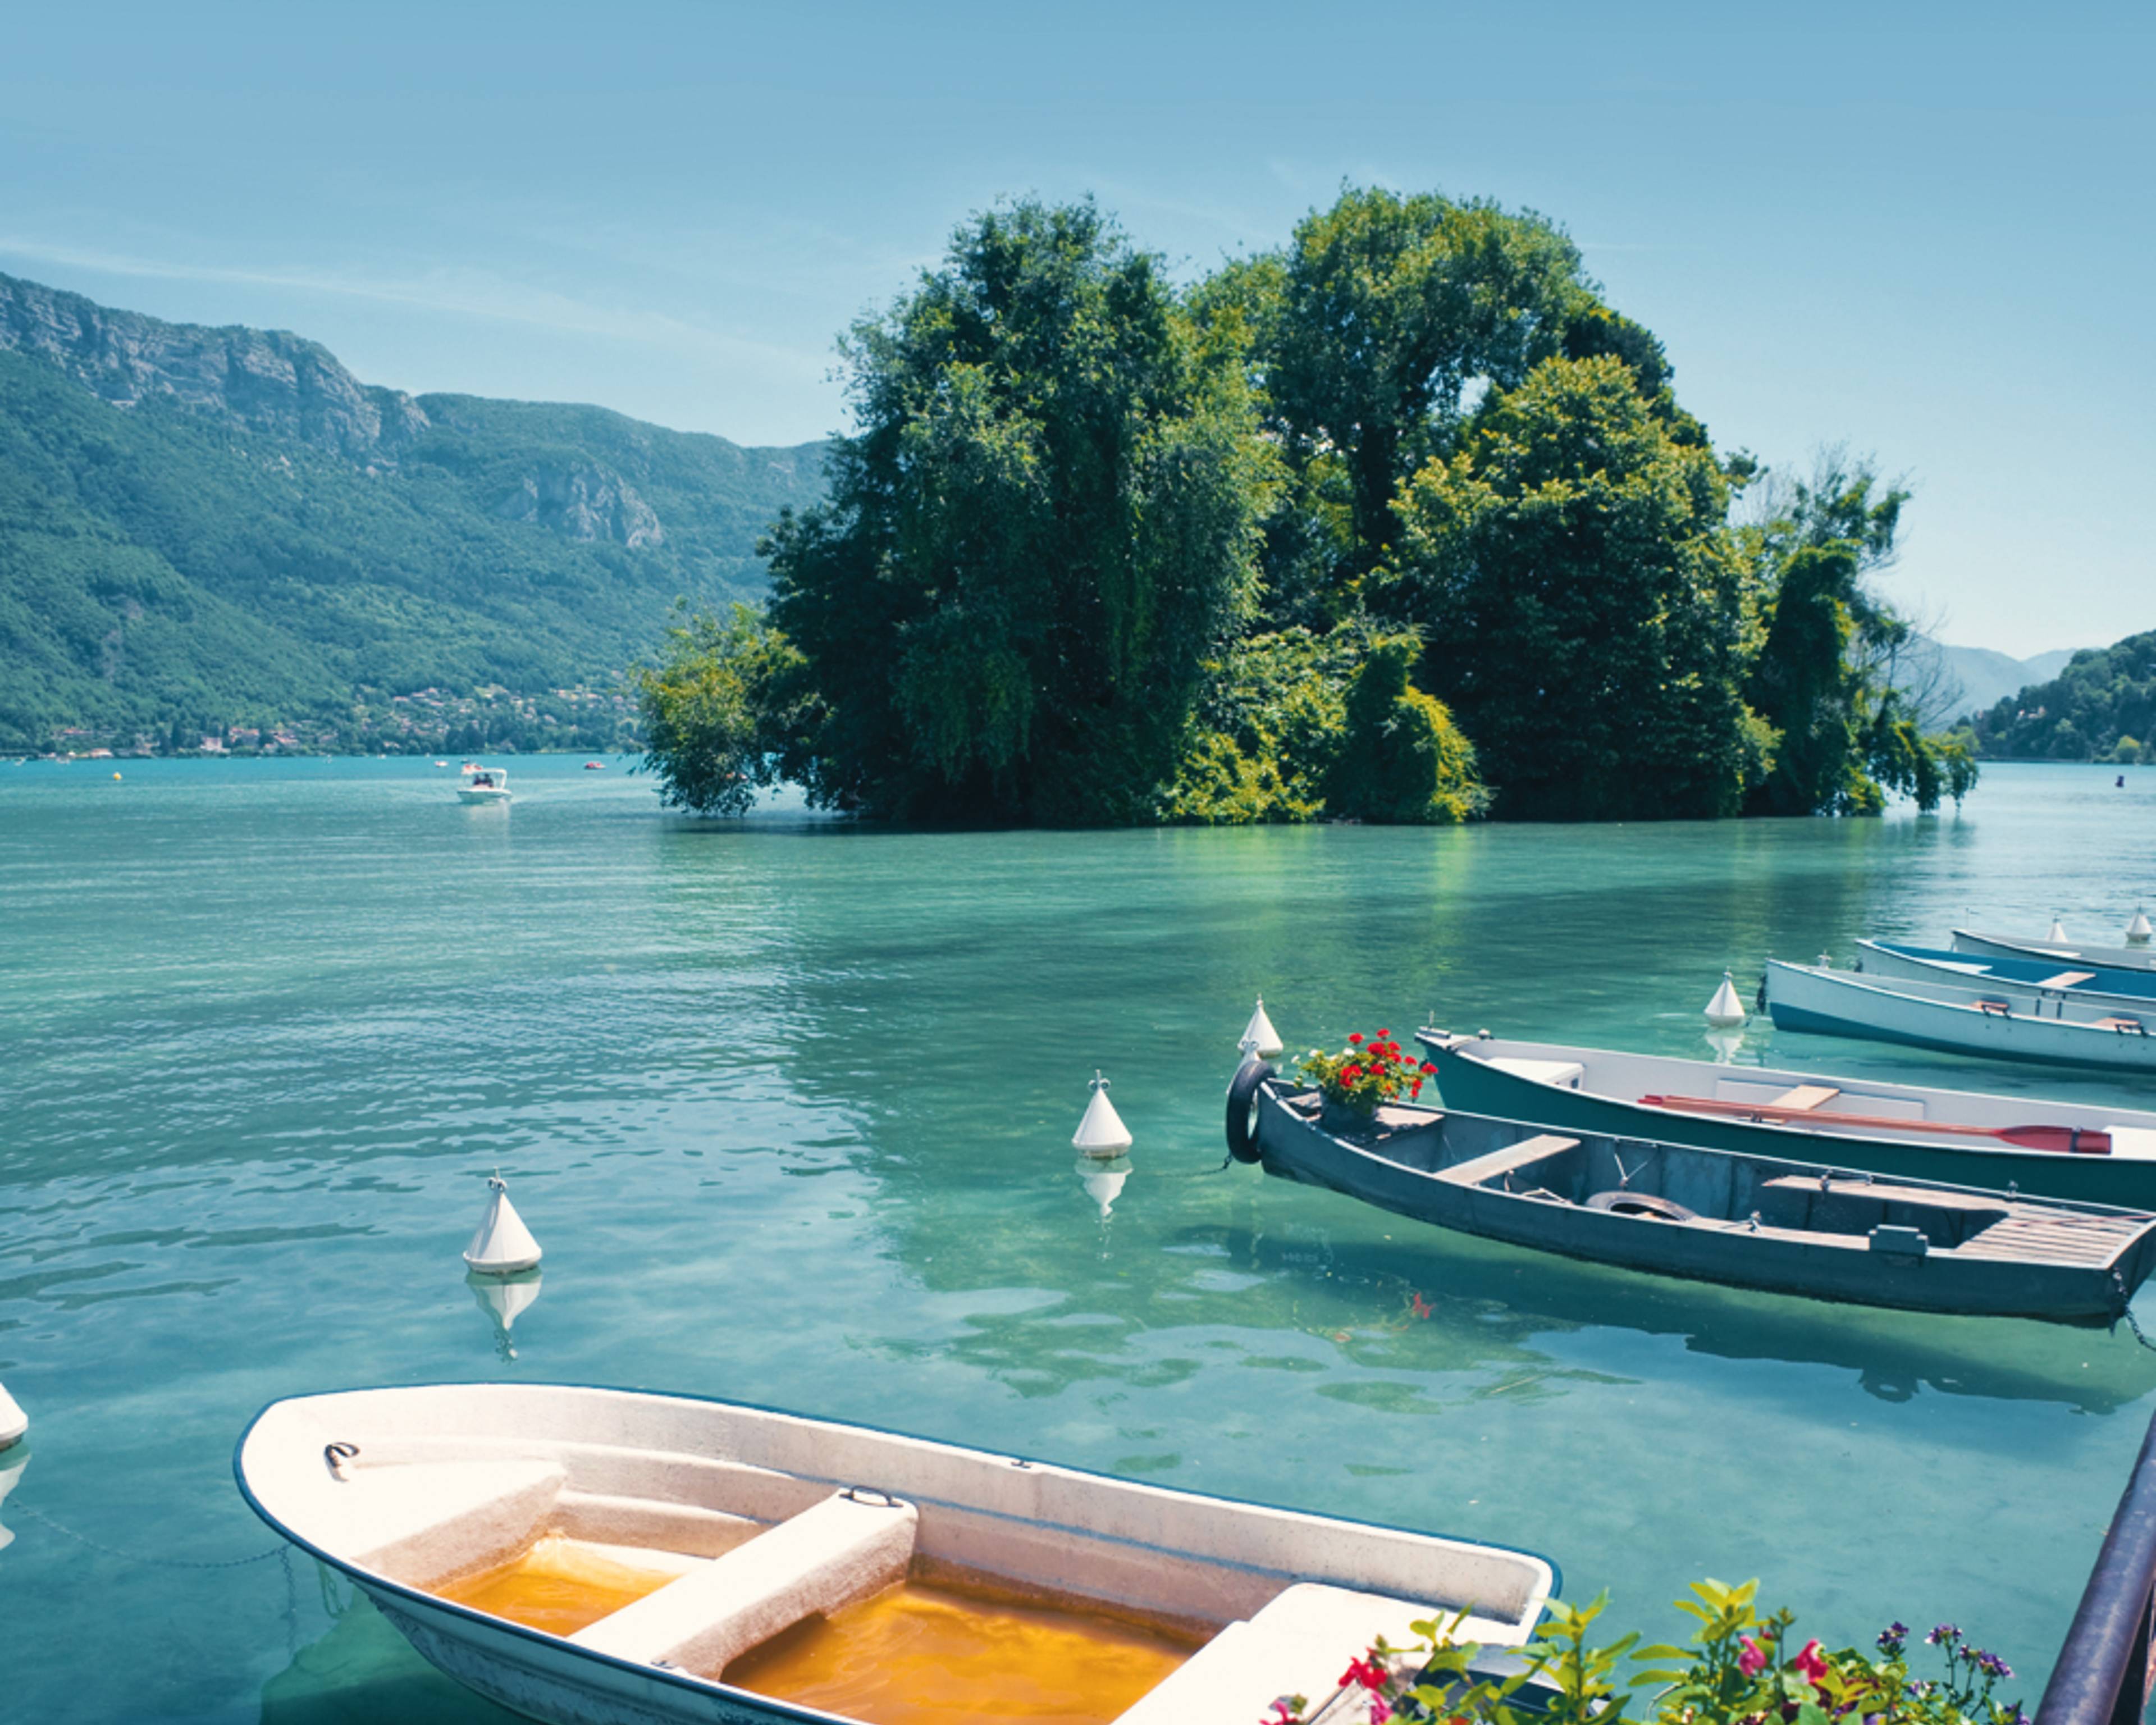 Design your perfect tour of France's lakes with a local expert